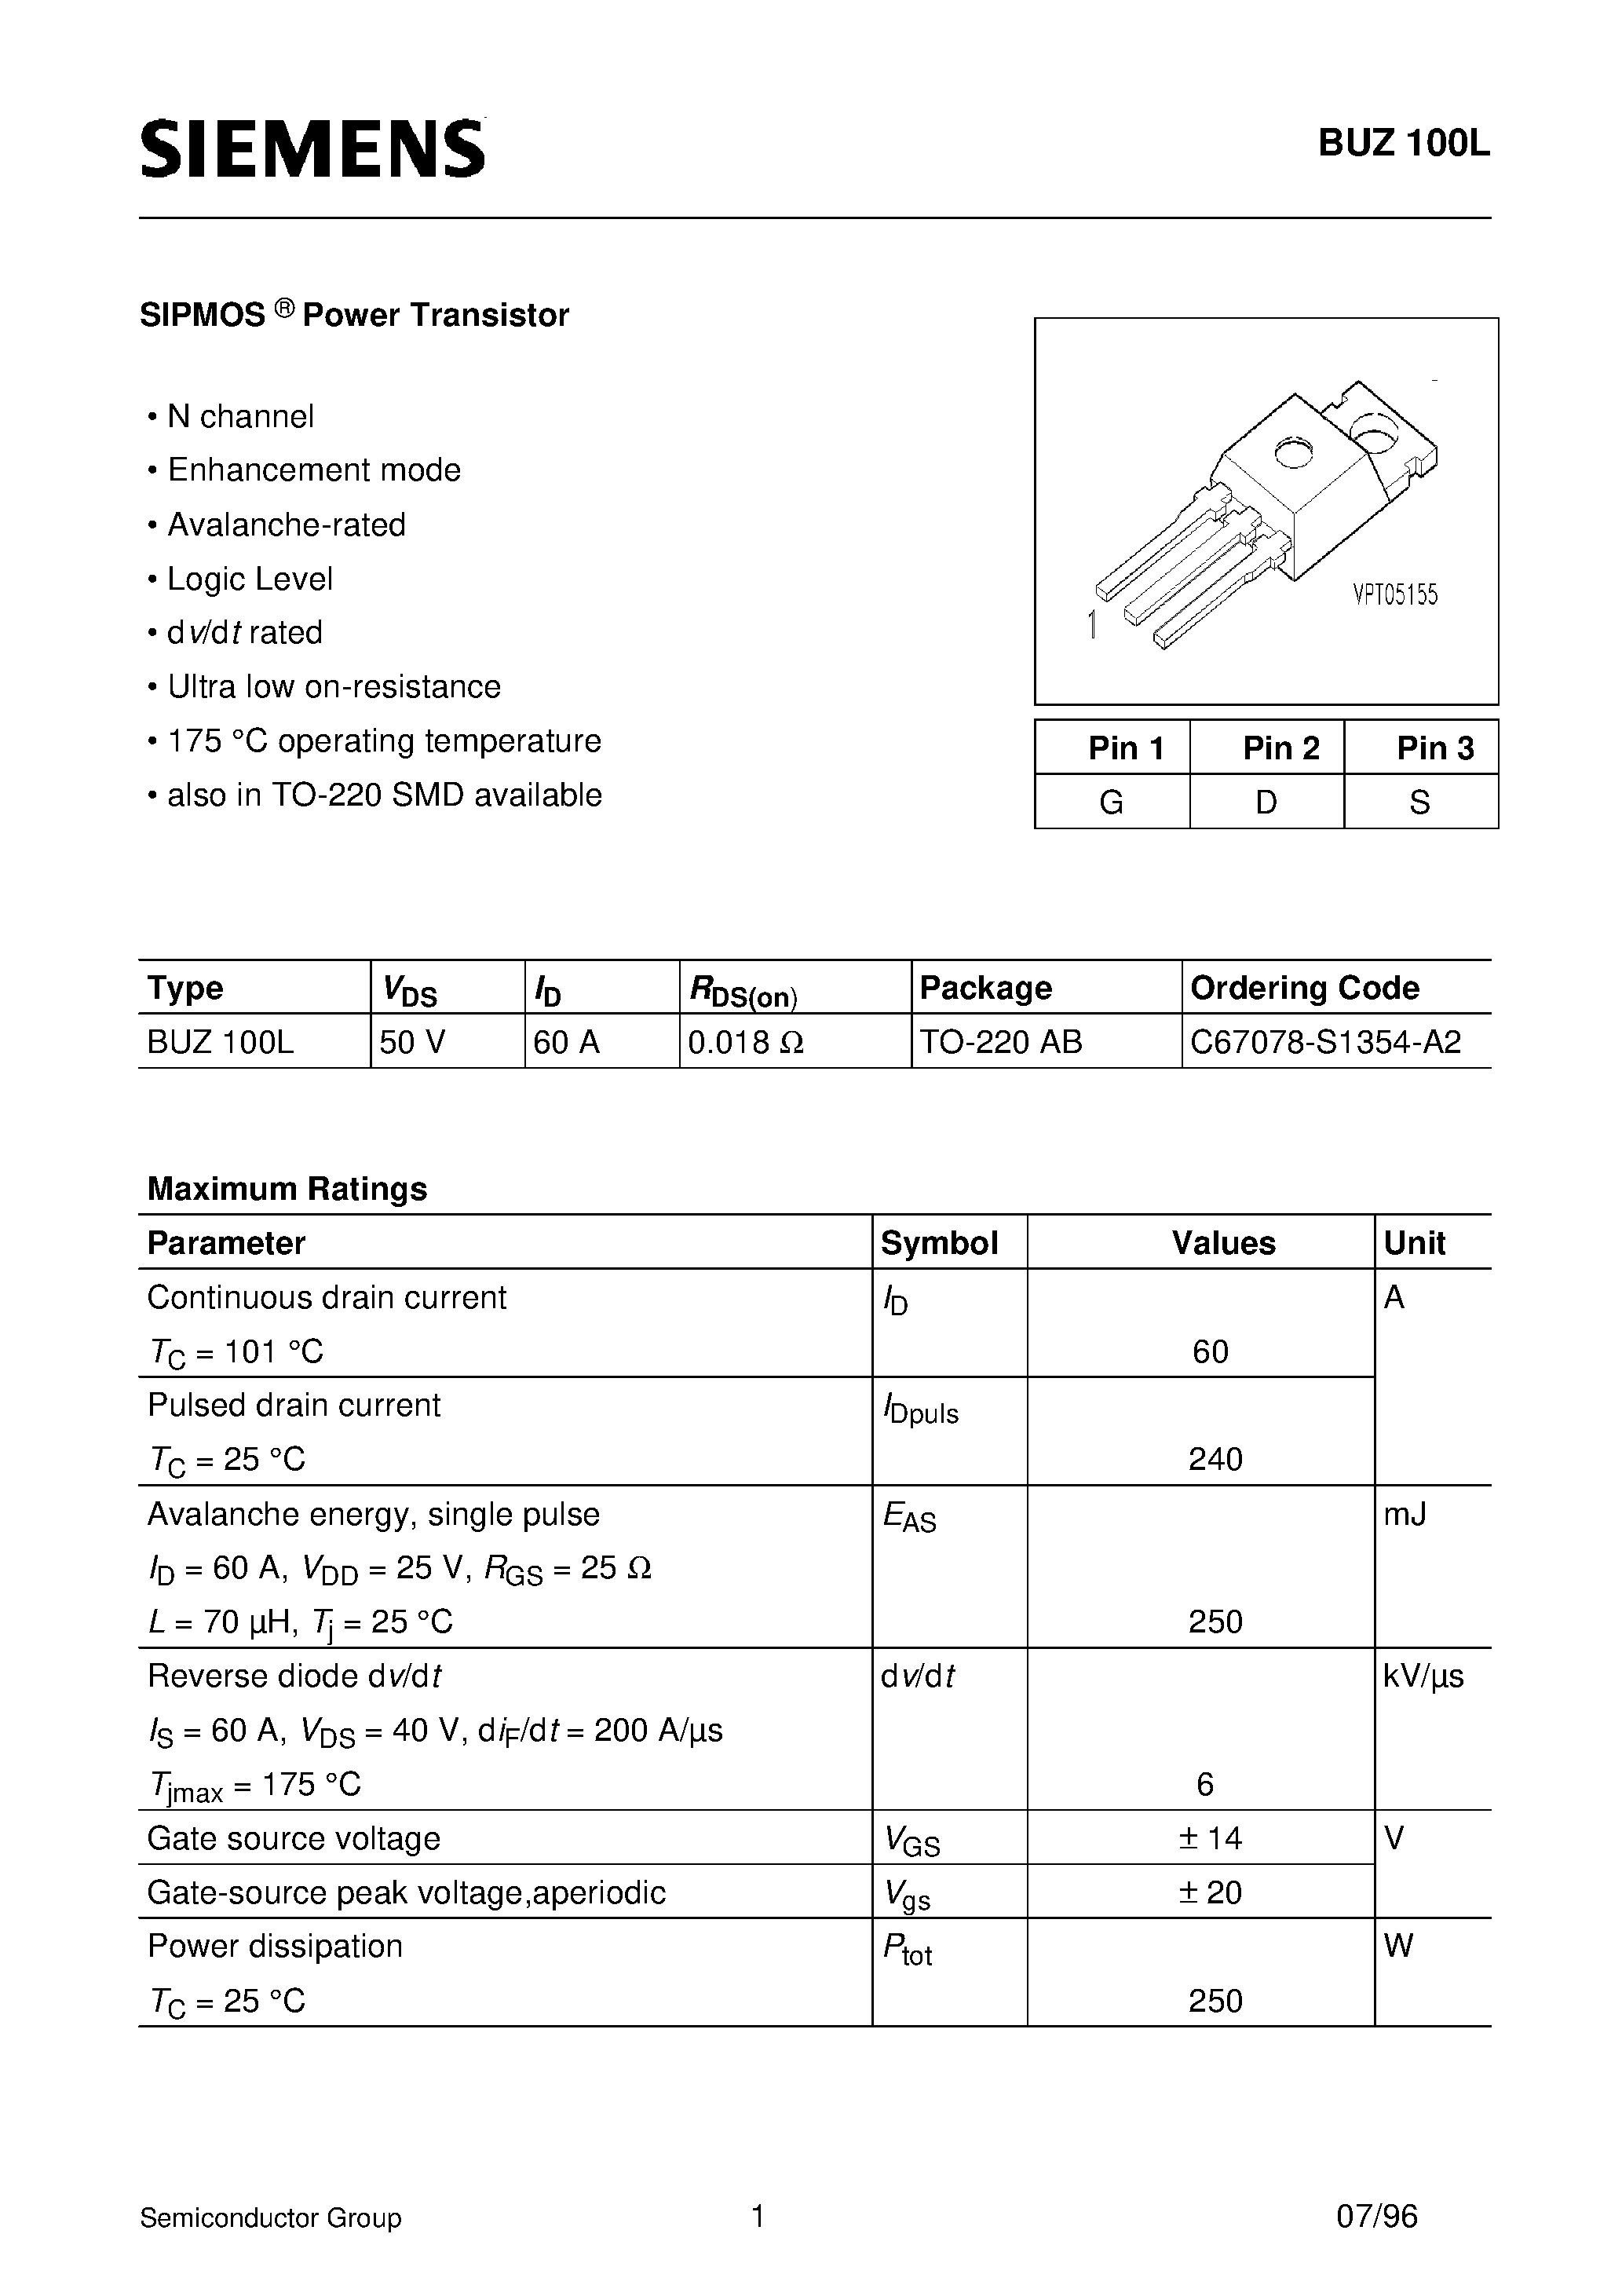 Datasheet BUZ100L - SIPMOS Power Transistor (N channel Enhancement mode Avalanche-rated Logic Level) page 1